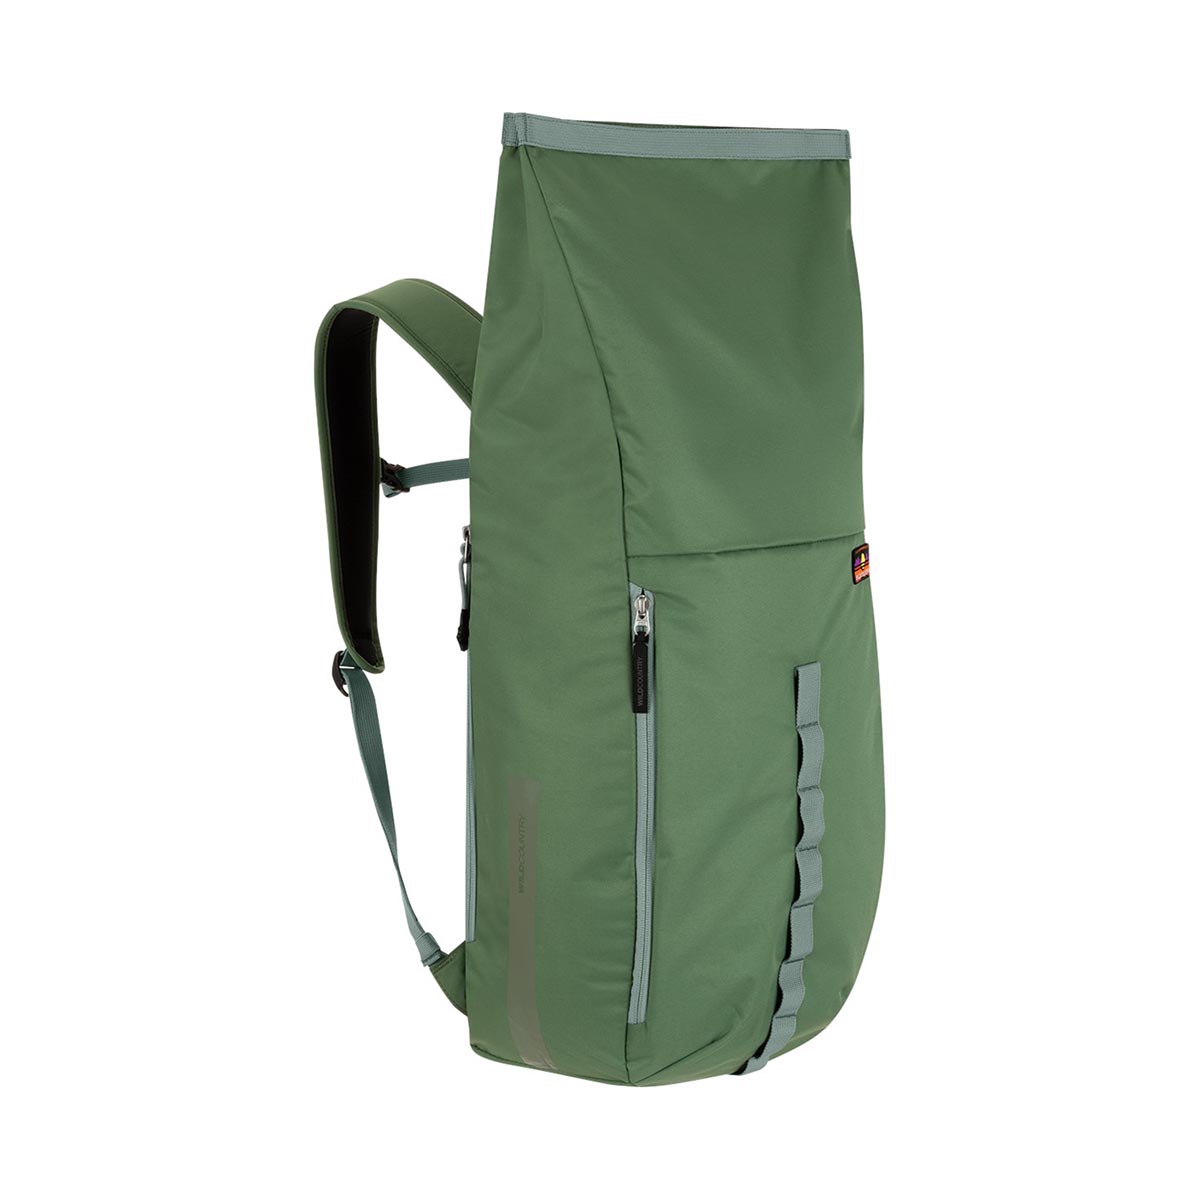 WILD COUNTRY - FLOW BACK PACK 26 L